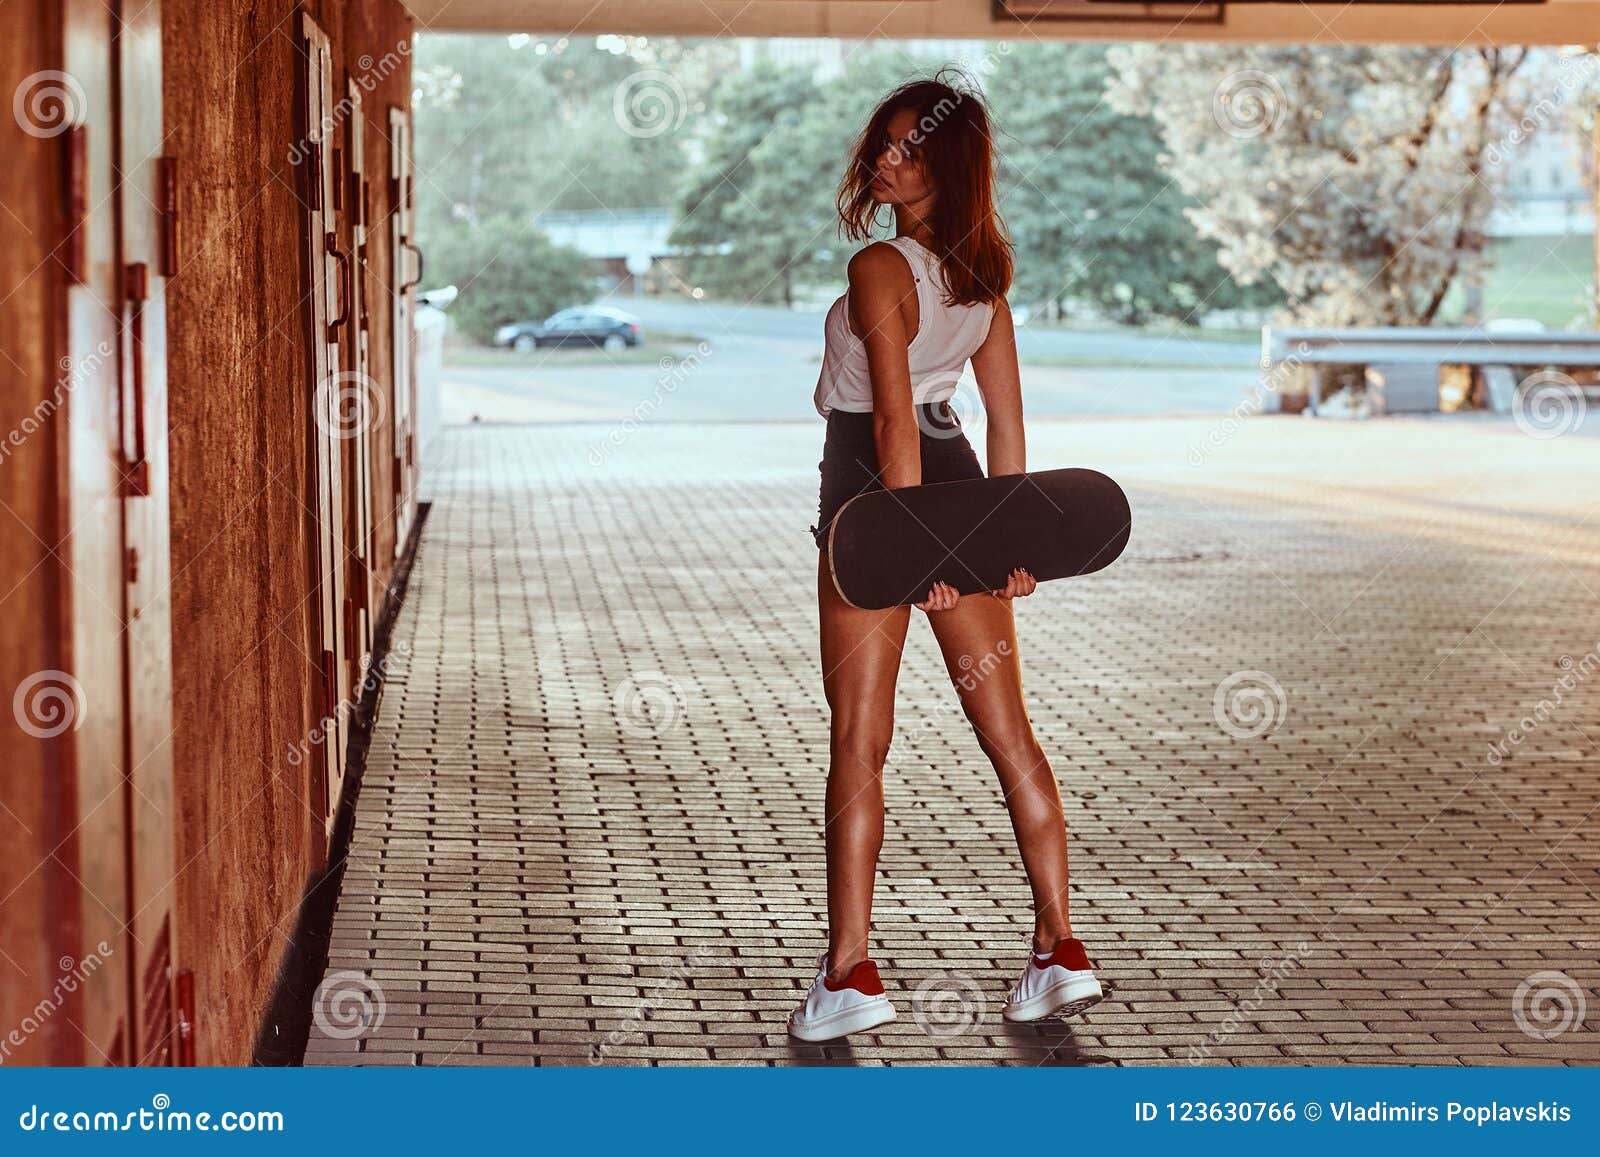 Back View of a Sensual Young Skater Girl Dressed in Shorts and T-shirt ...